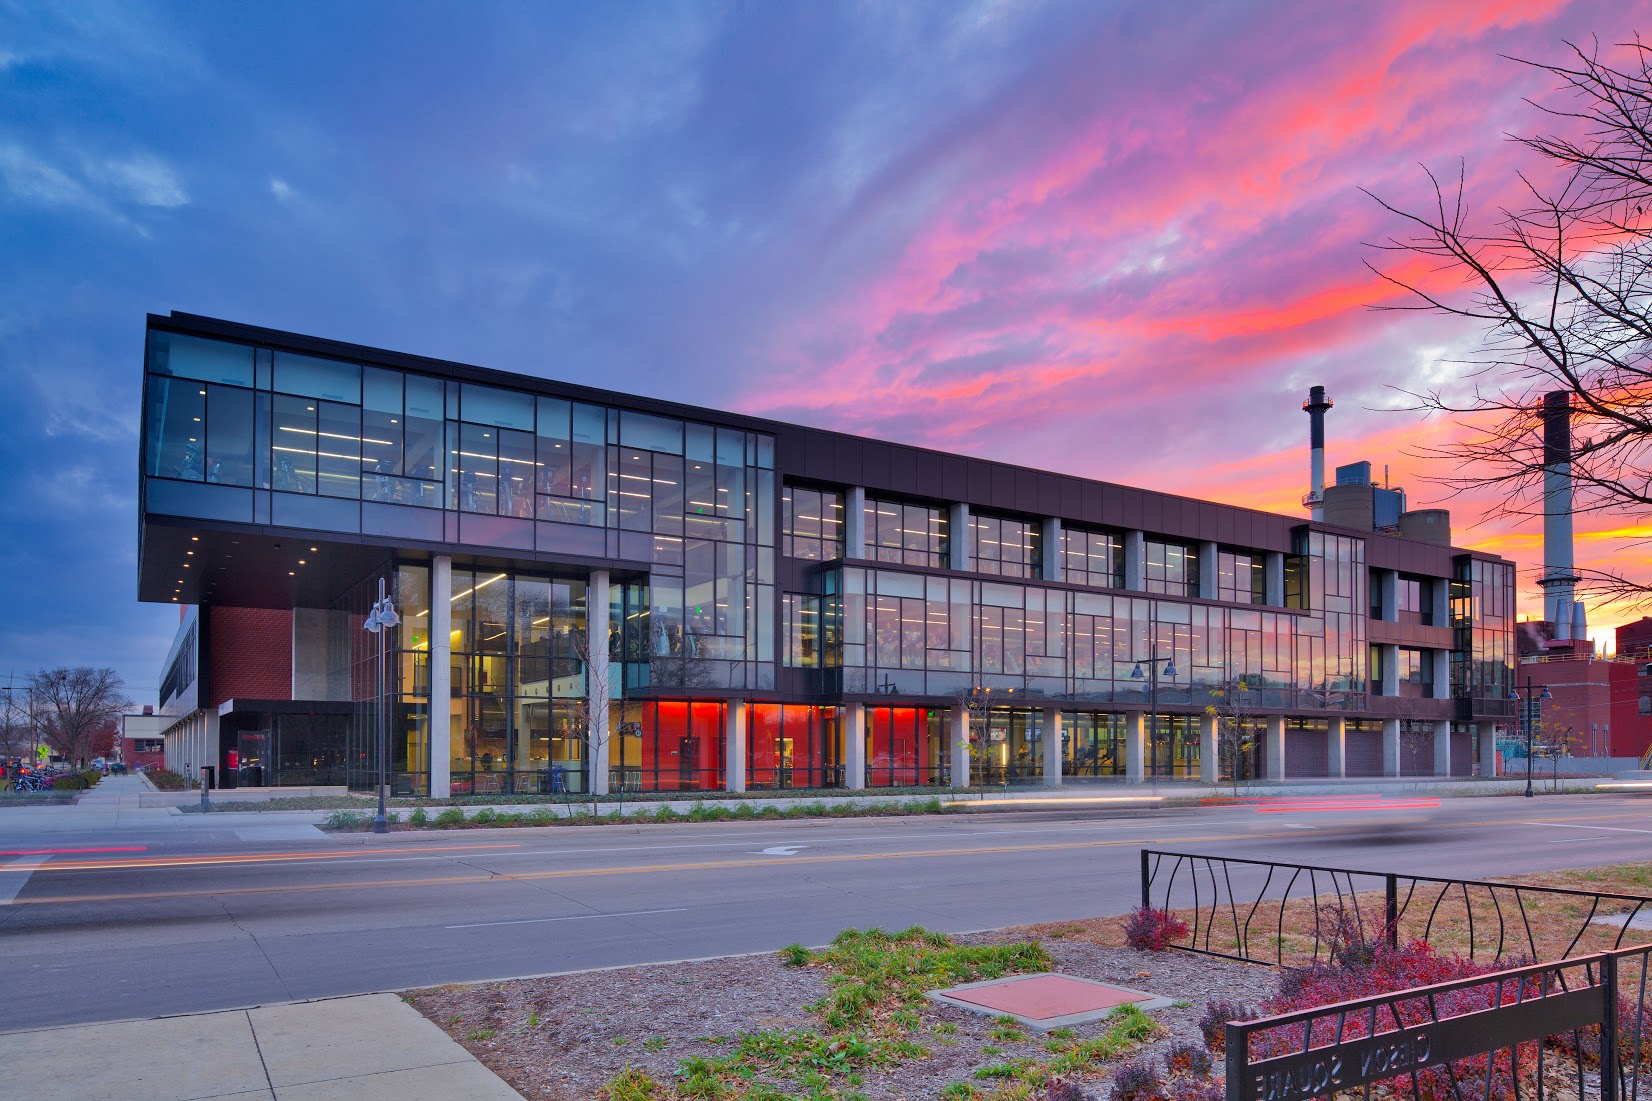 The Recreational Services building at sunset